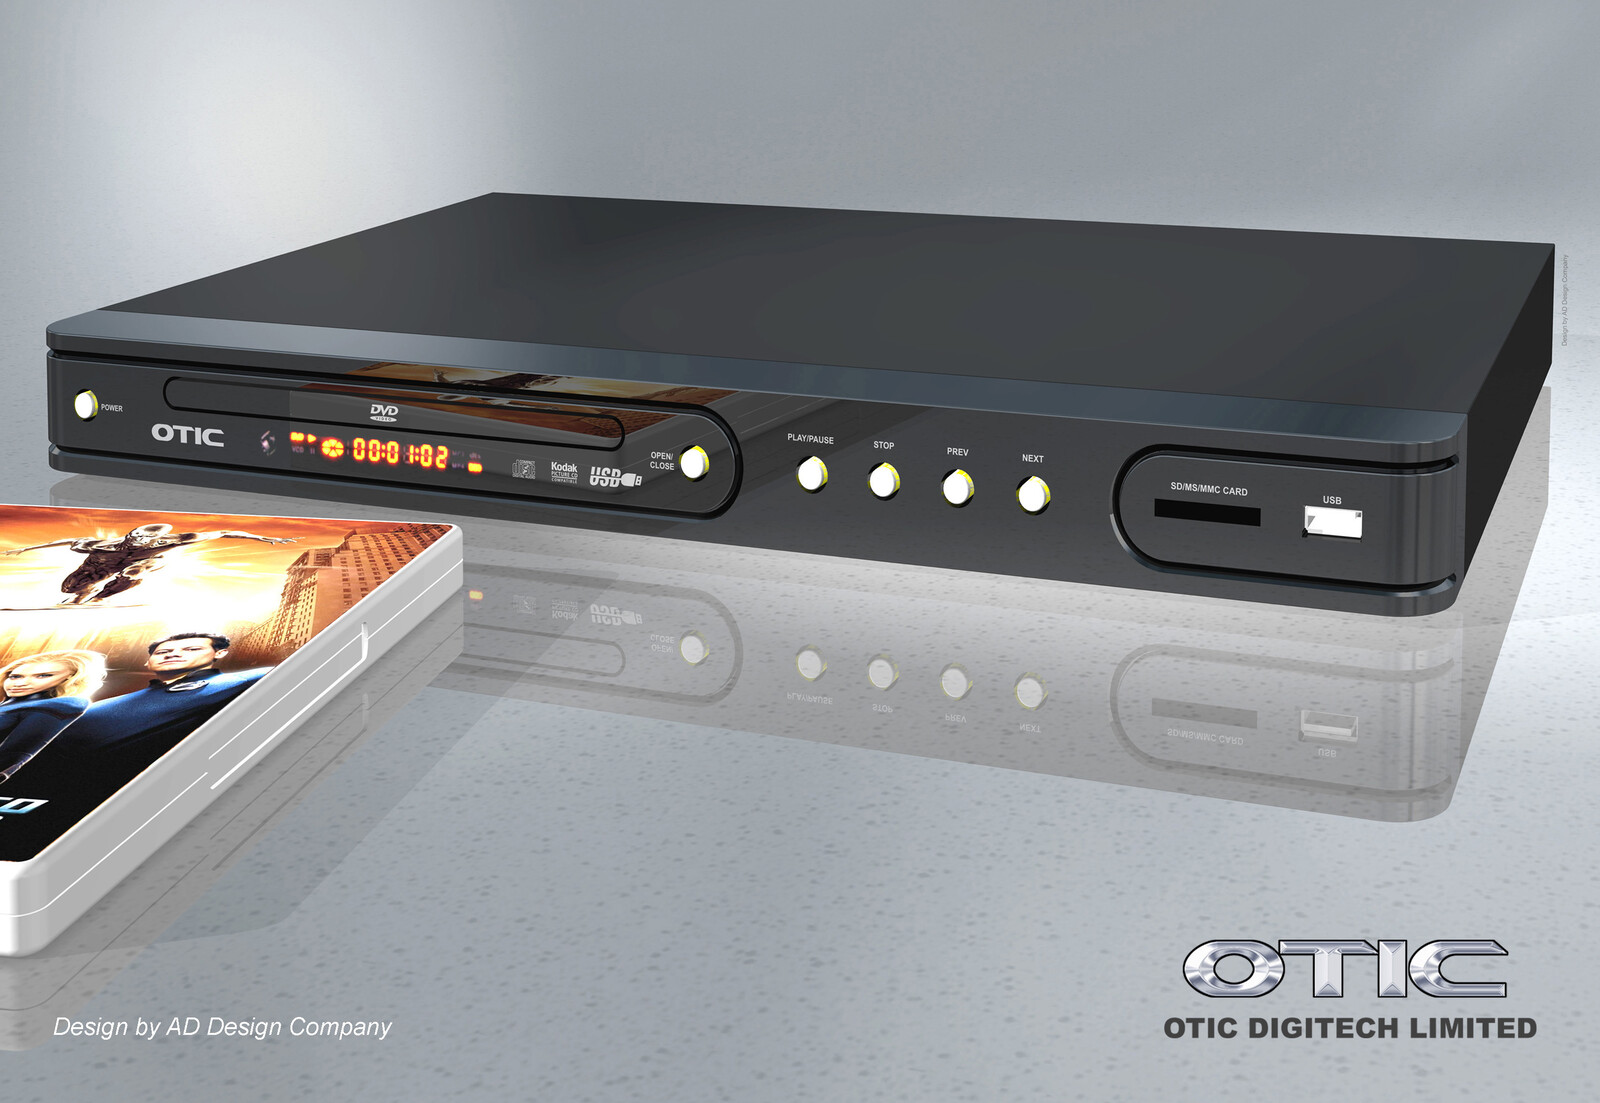 💎 Stand-Alone DVD Player | Design by Leung Chung Kwan on 2007 💎
Brand Name︰OTIC | Client︰OTIC Limited